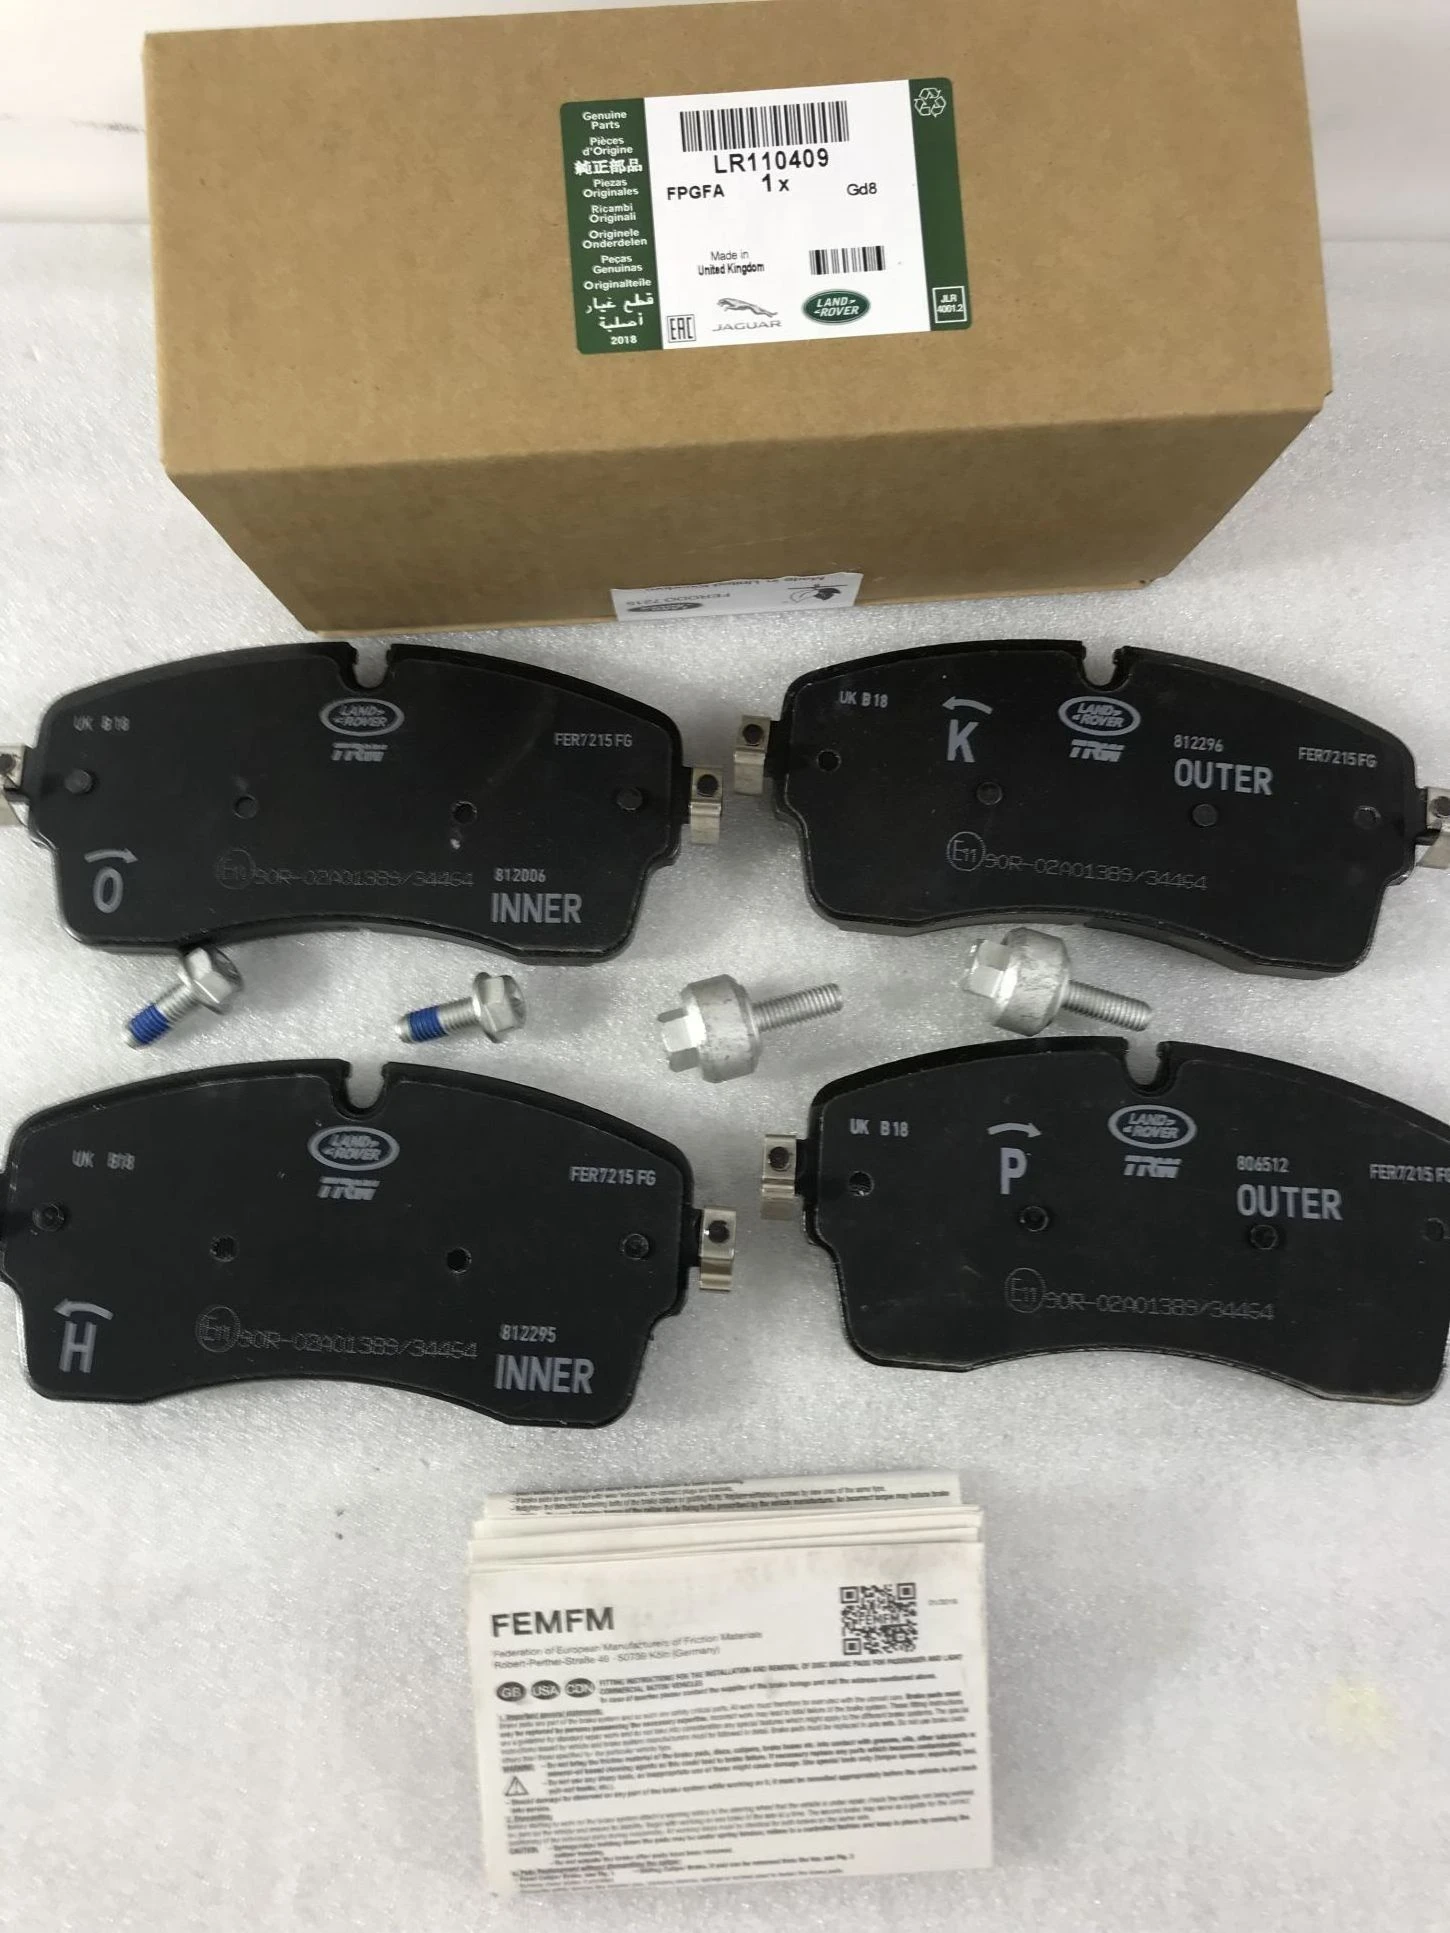 Land Rover front wheel brake pads are applicable to range rover administration, Range Rover Sport and discovery 5 LR110409 parking brake